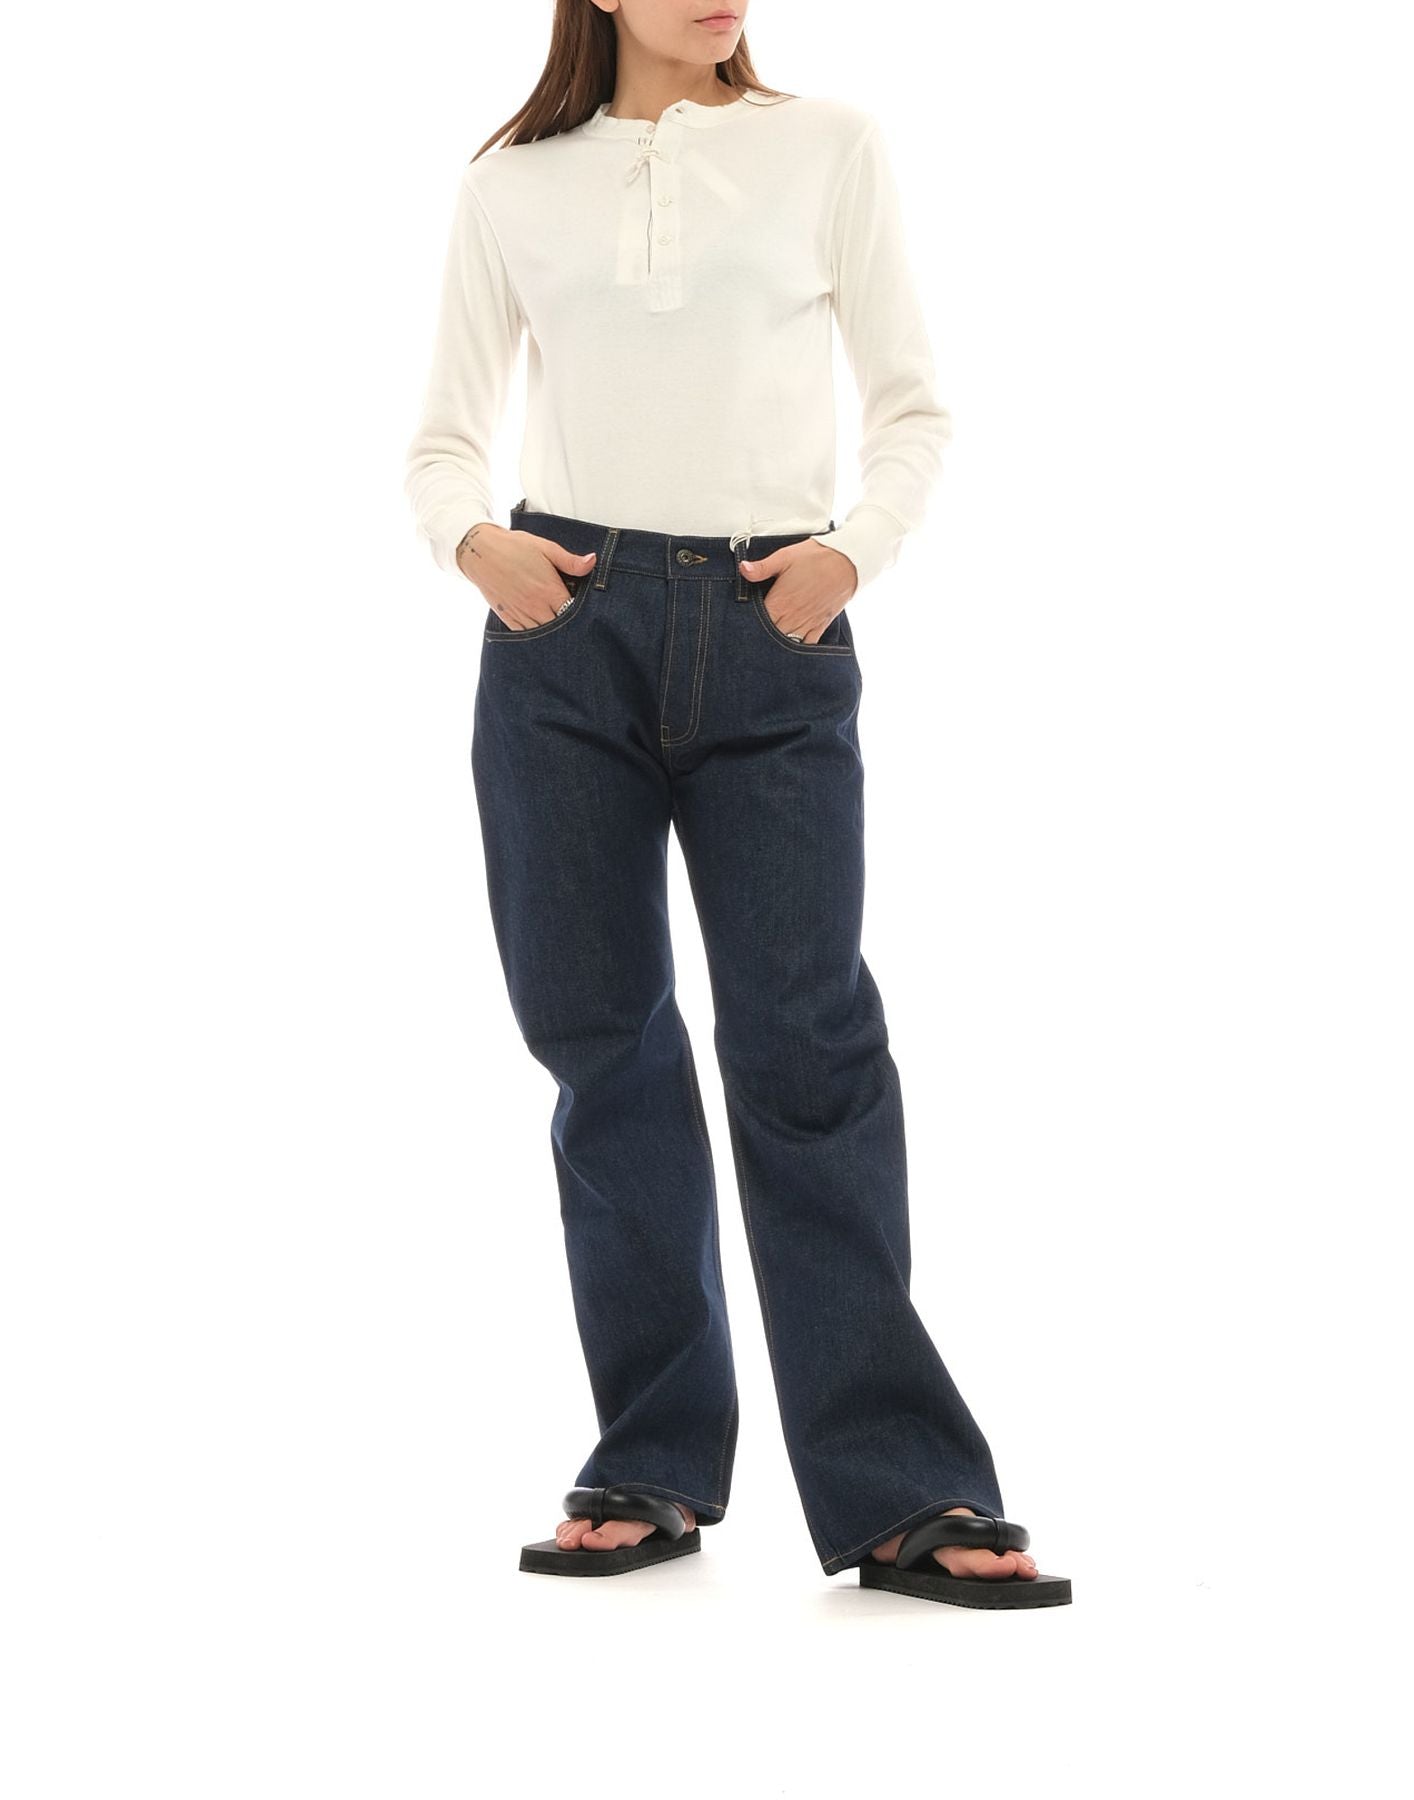 Jeans for woman TYPE 18 RELAXED RAW PEPPINO PEPPINO